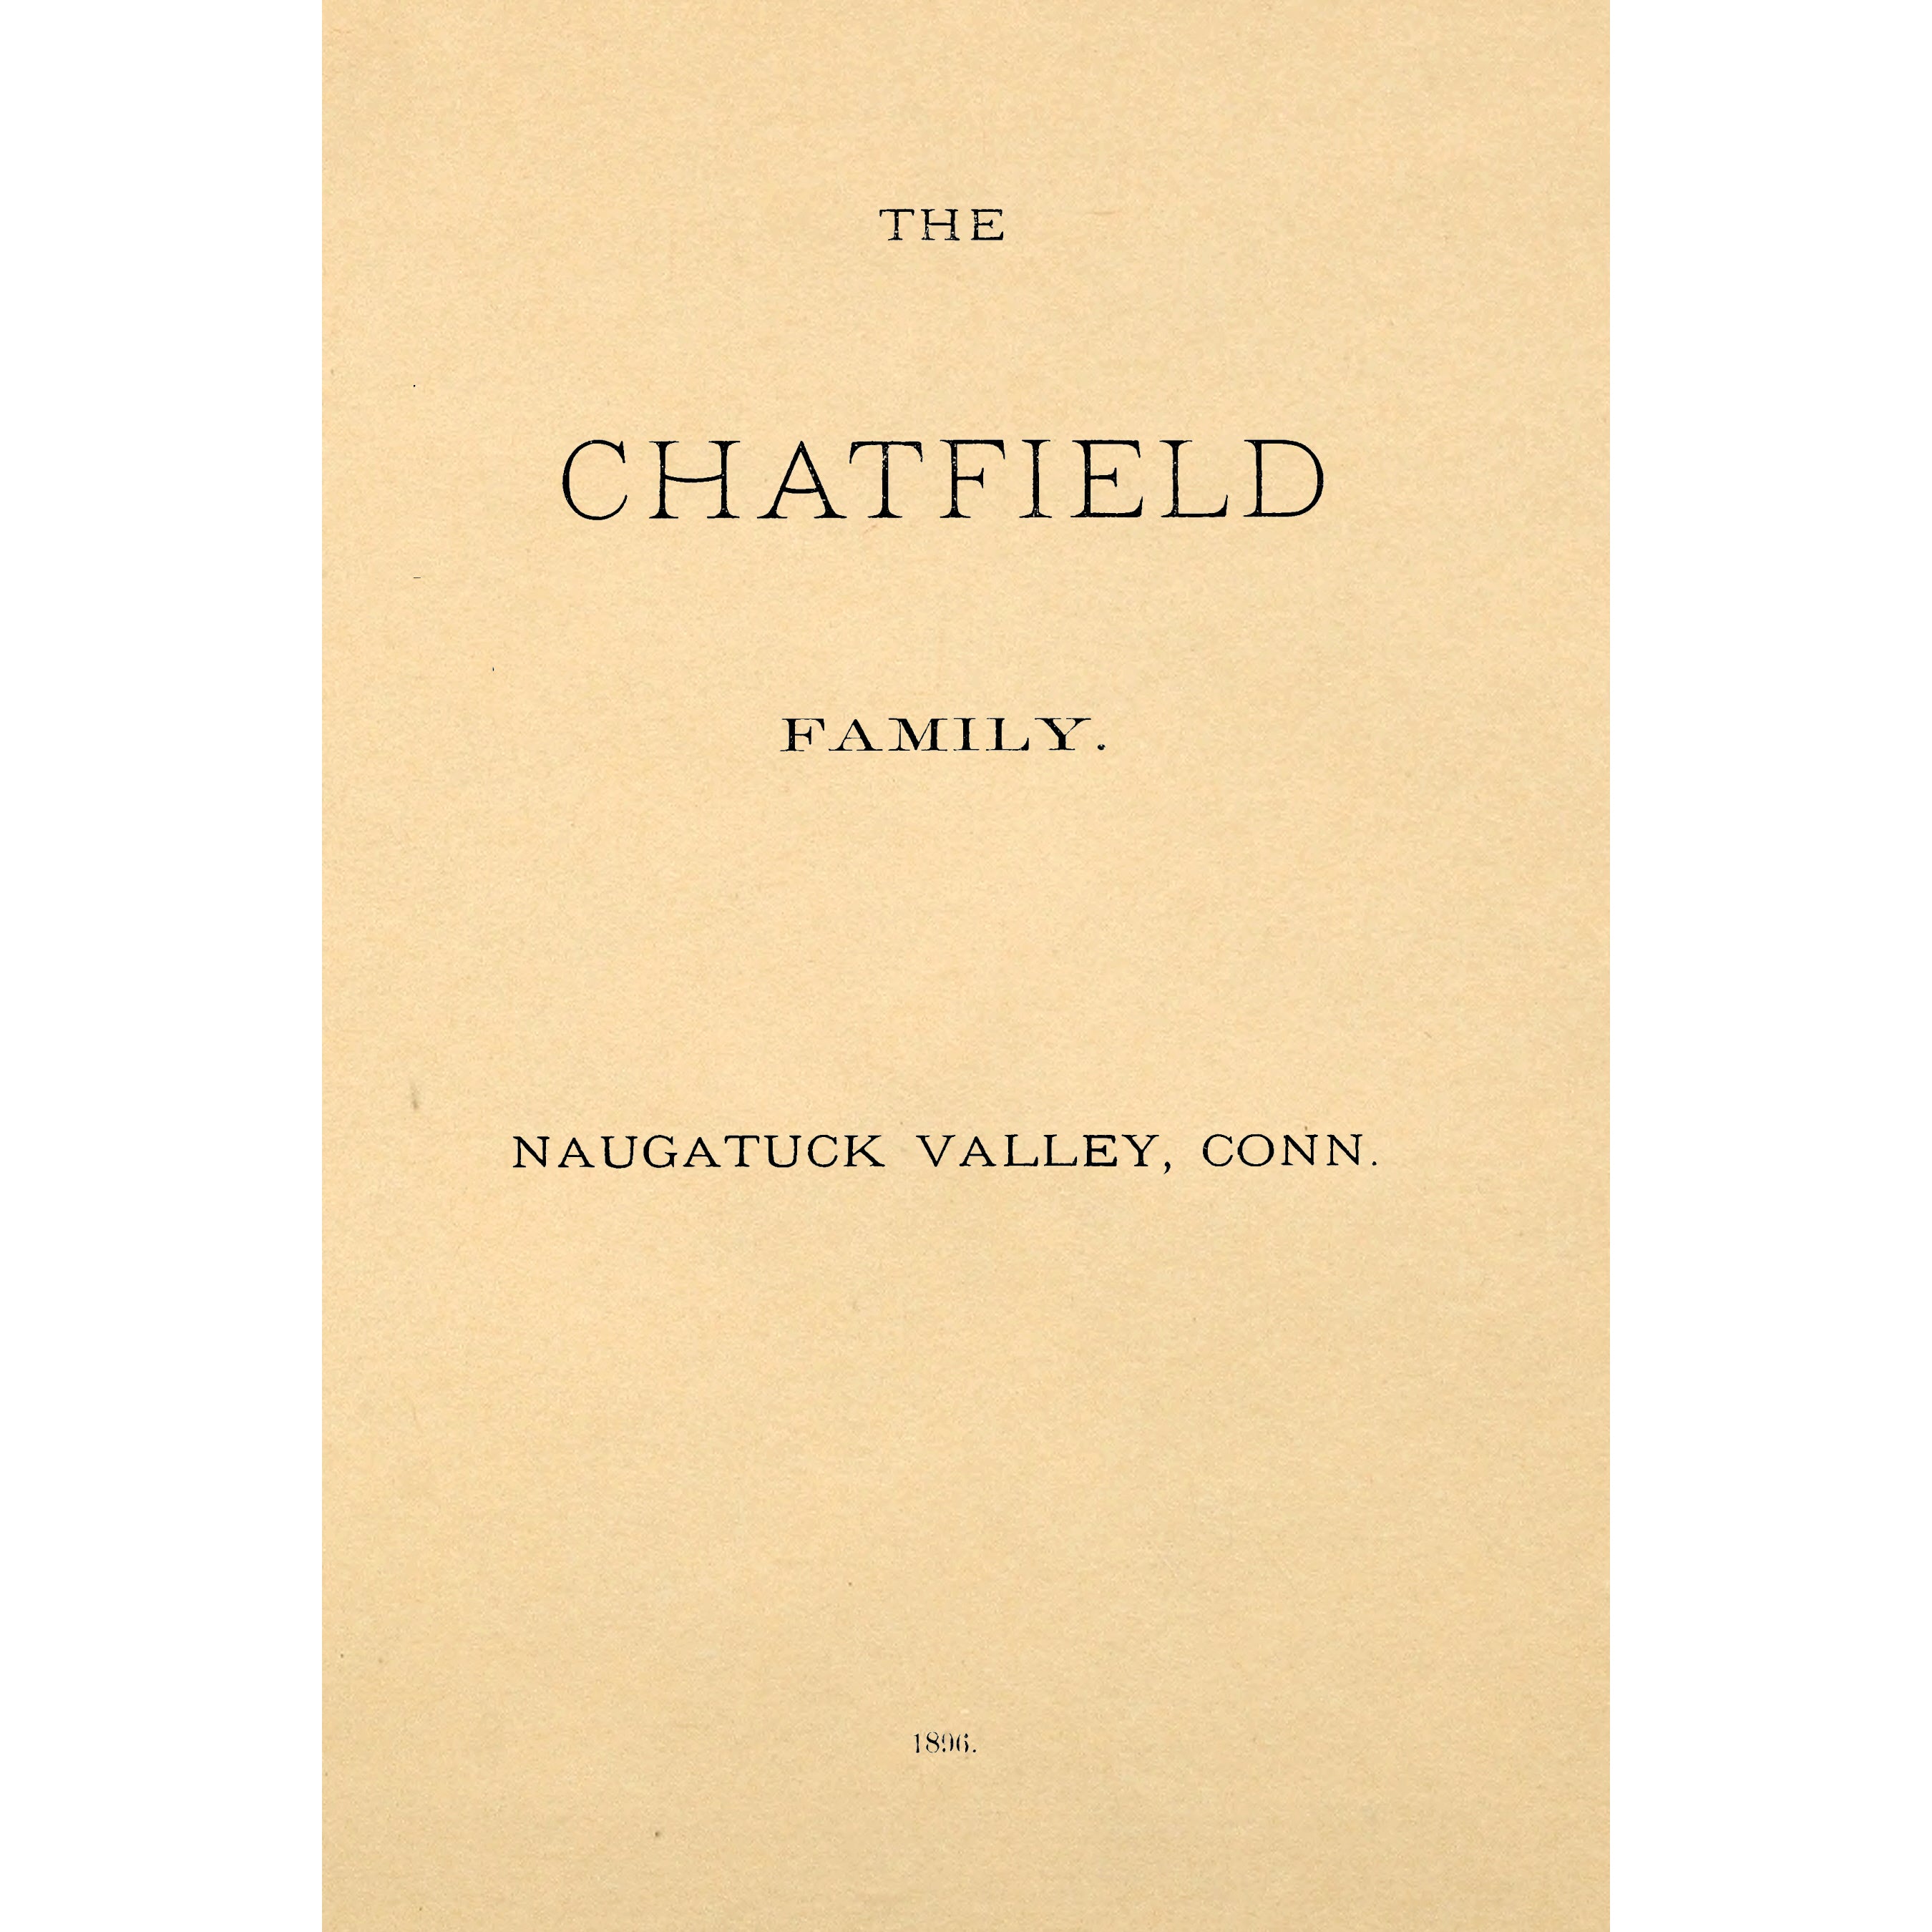 The Chatfield family : principally from records in the Naugatuck Valley, Conn.